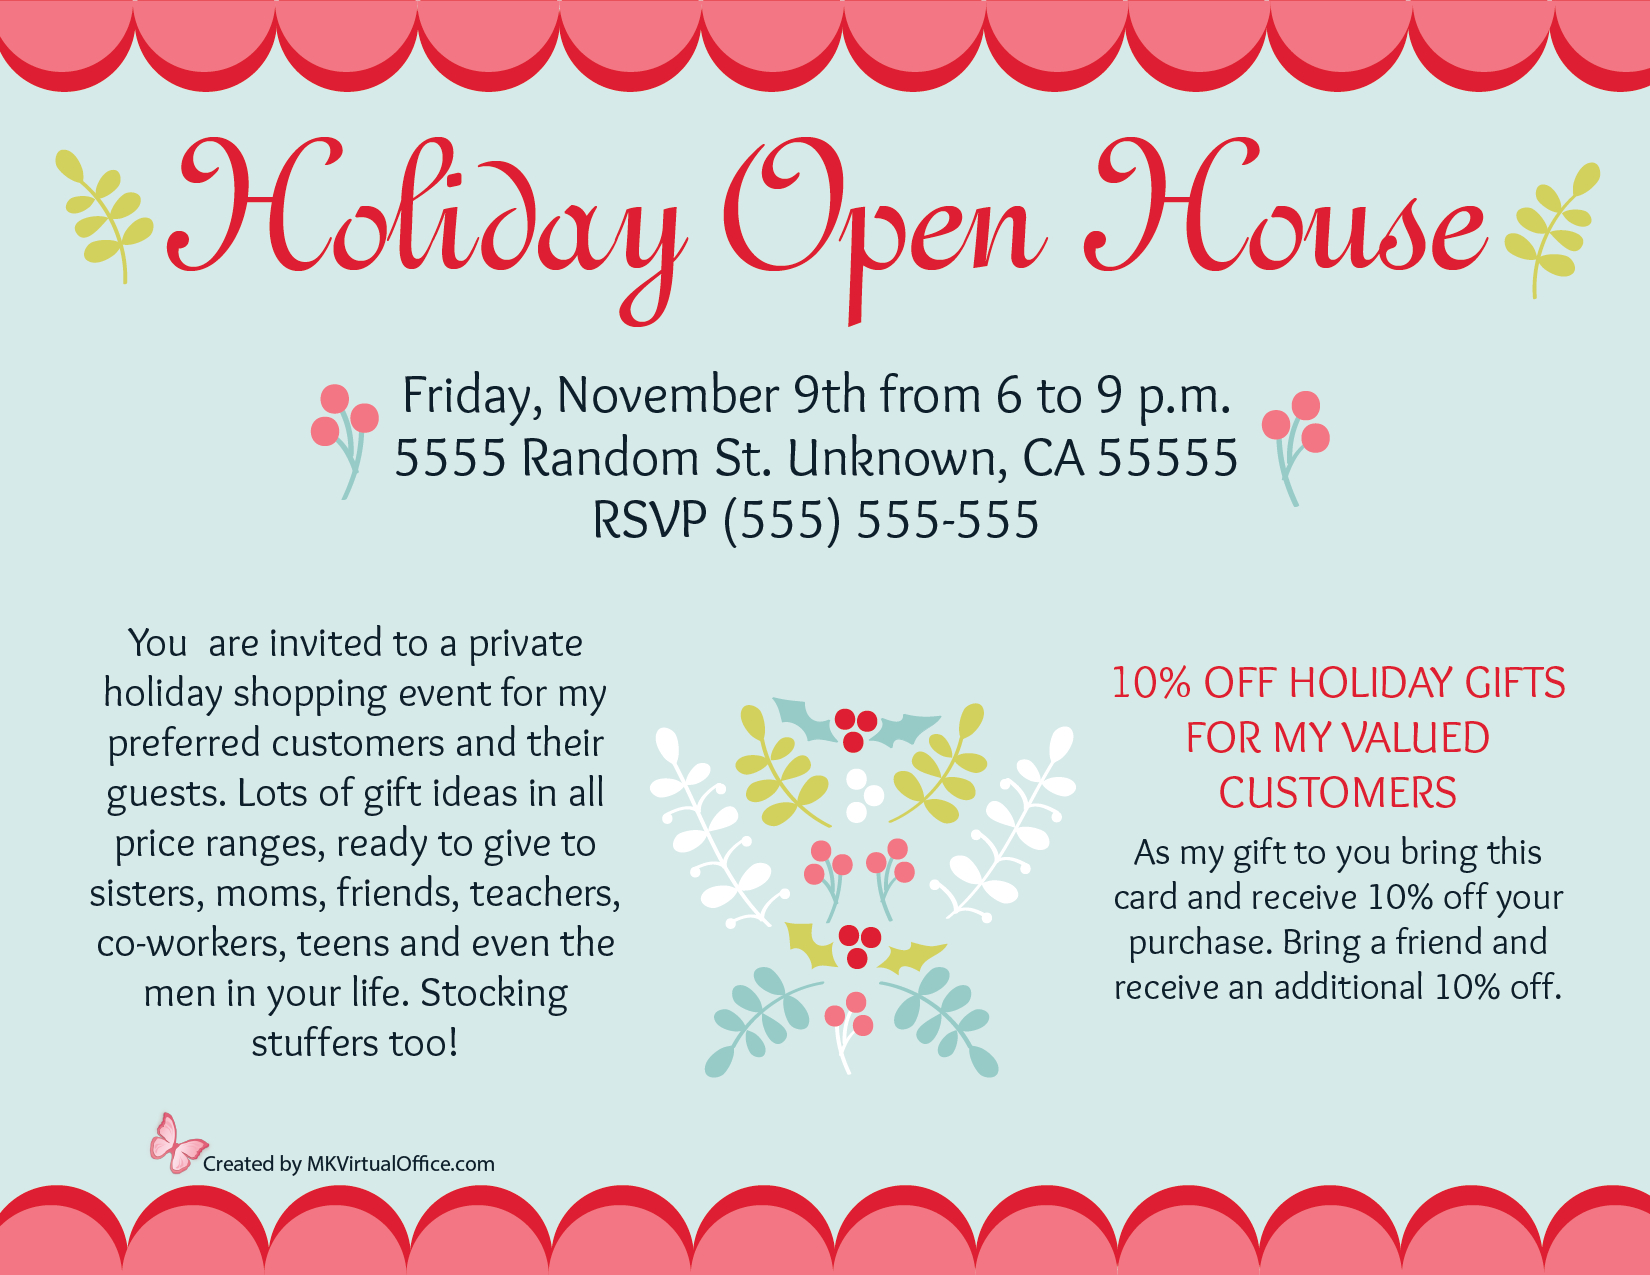 Holiday Open House Postcards Mk Virtual Office within measurements 1650 X 1275